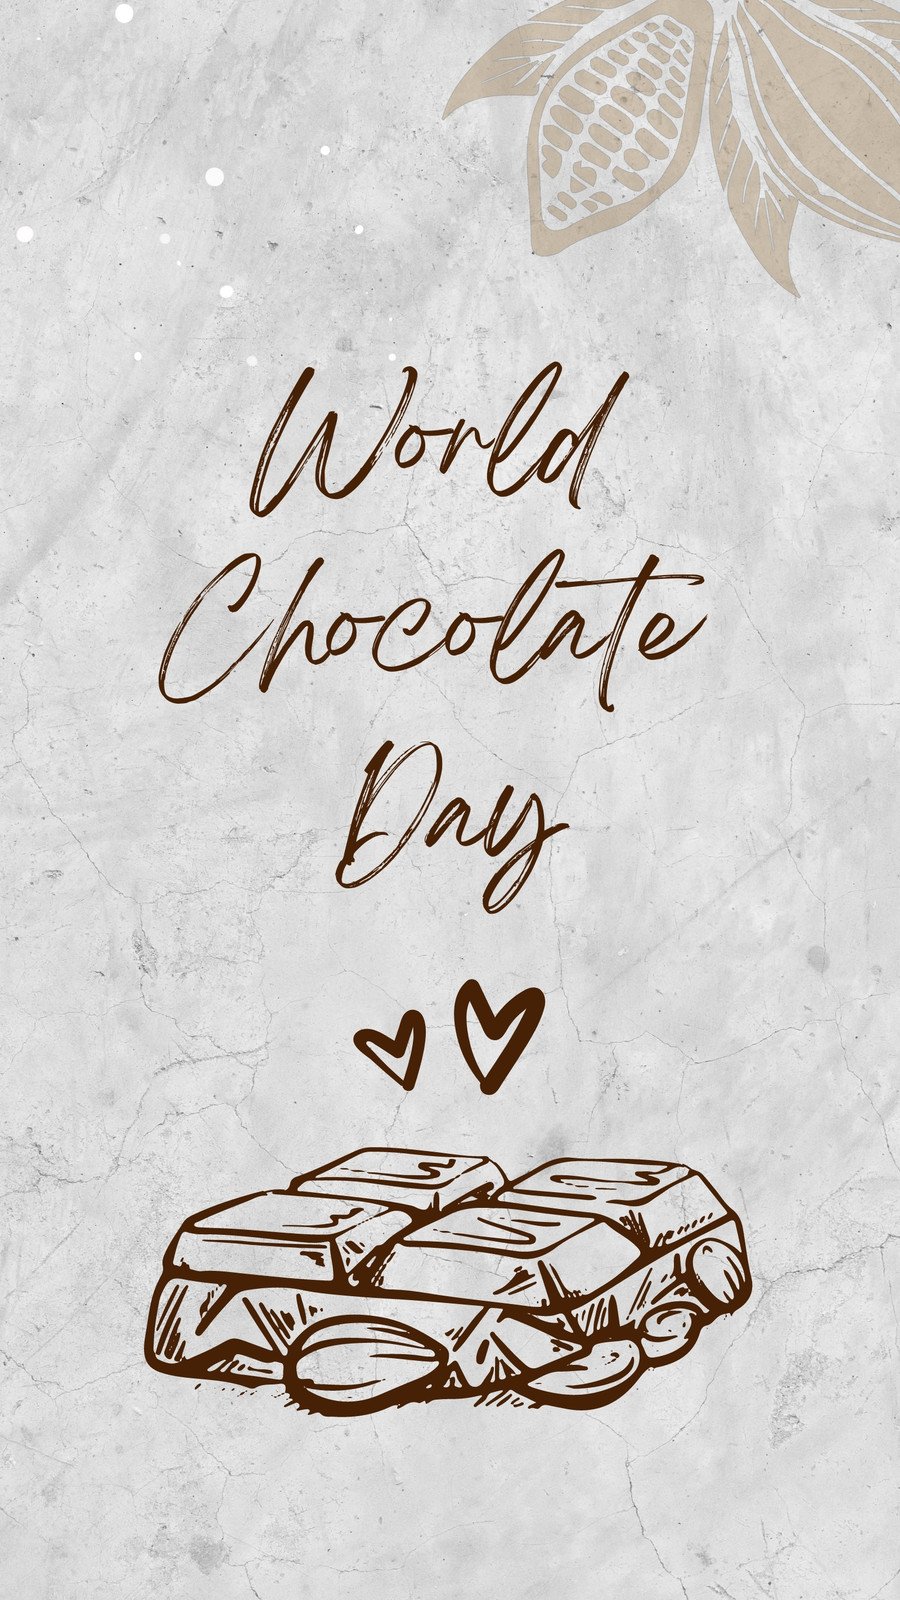 Hand Drawn Happy Chocolate Day Typography Stock Vector (Royalty Free)  1155393718 | Shutterstock